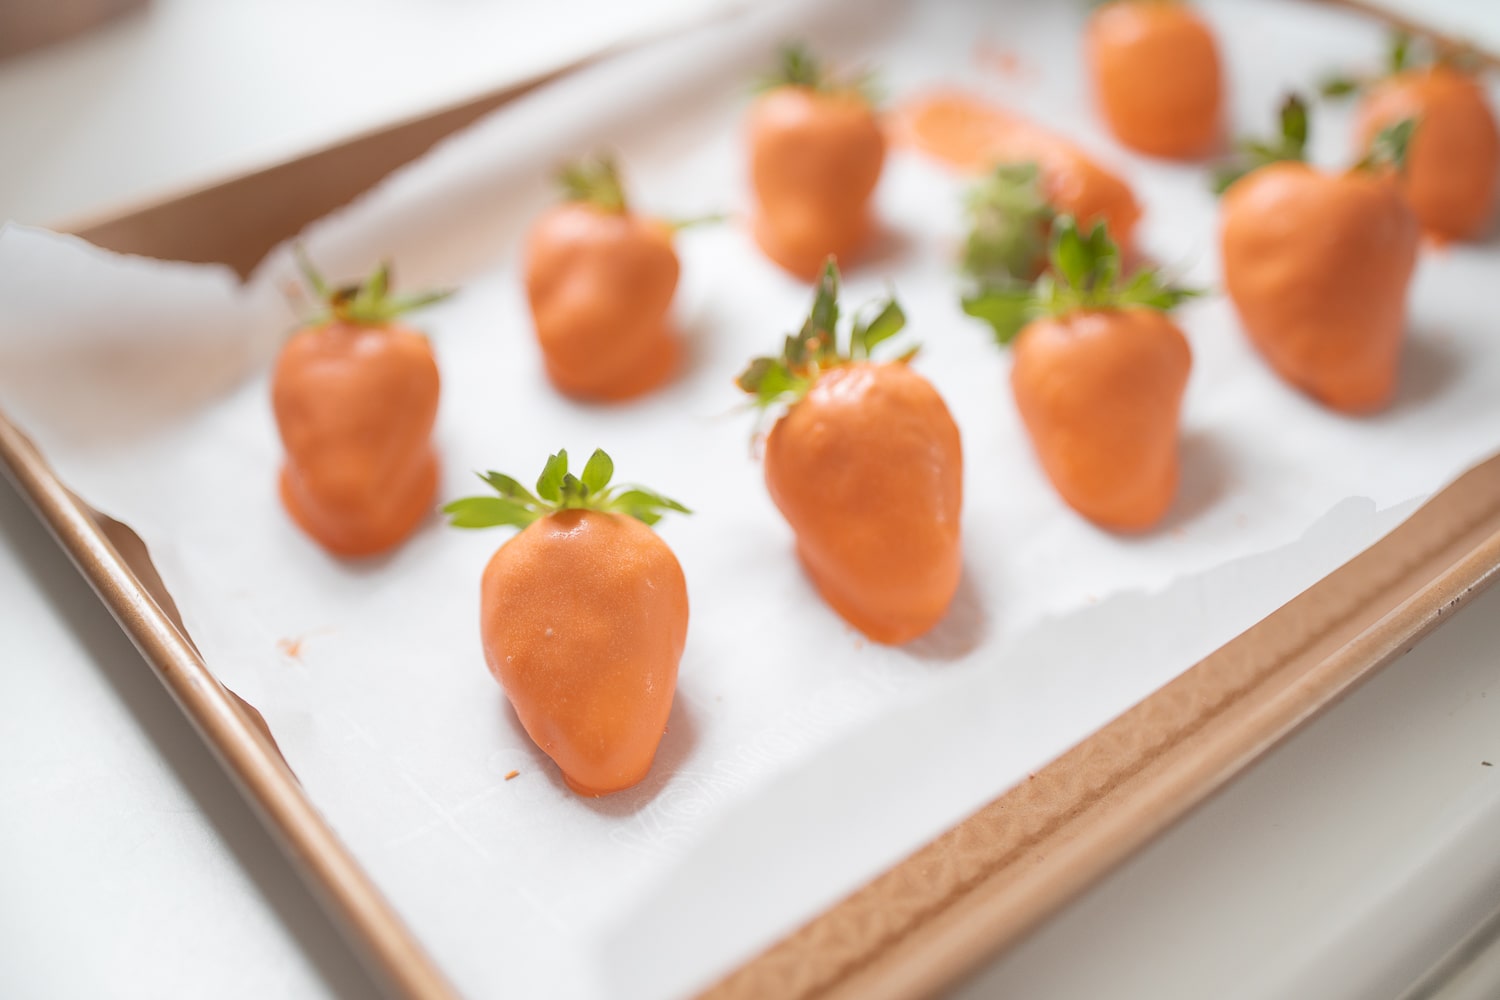 Blogger Stephanie Ziajka shows how to make chocolate dipped strawberry carrots on Diary of a Debutante